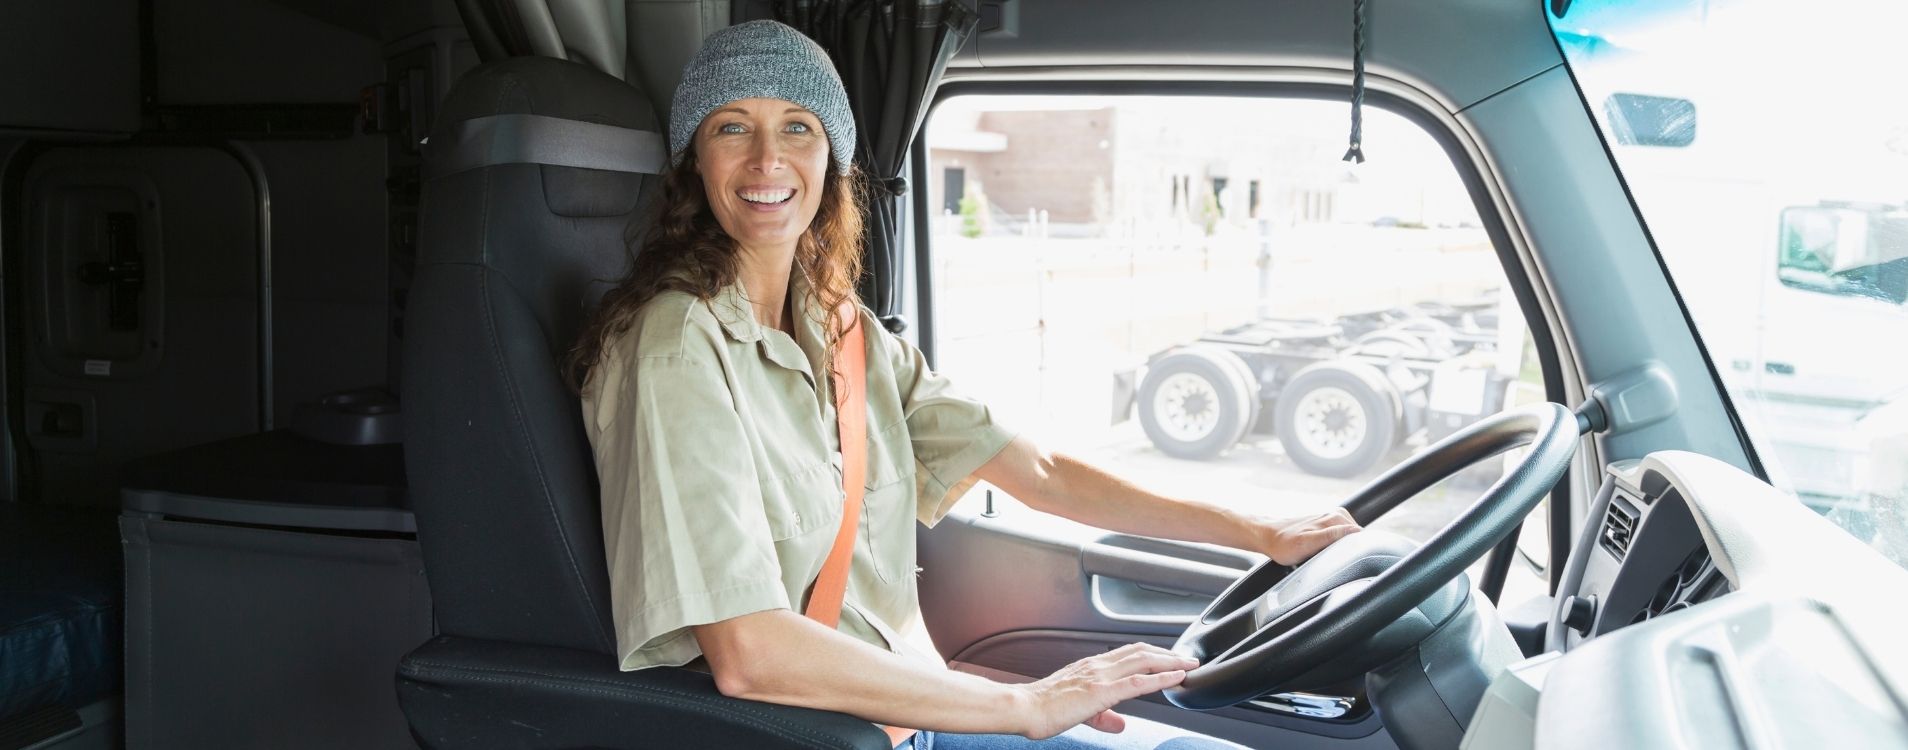 How To Start An Owner Operator Trucking Business In 10 Steps